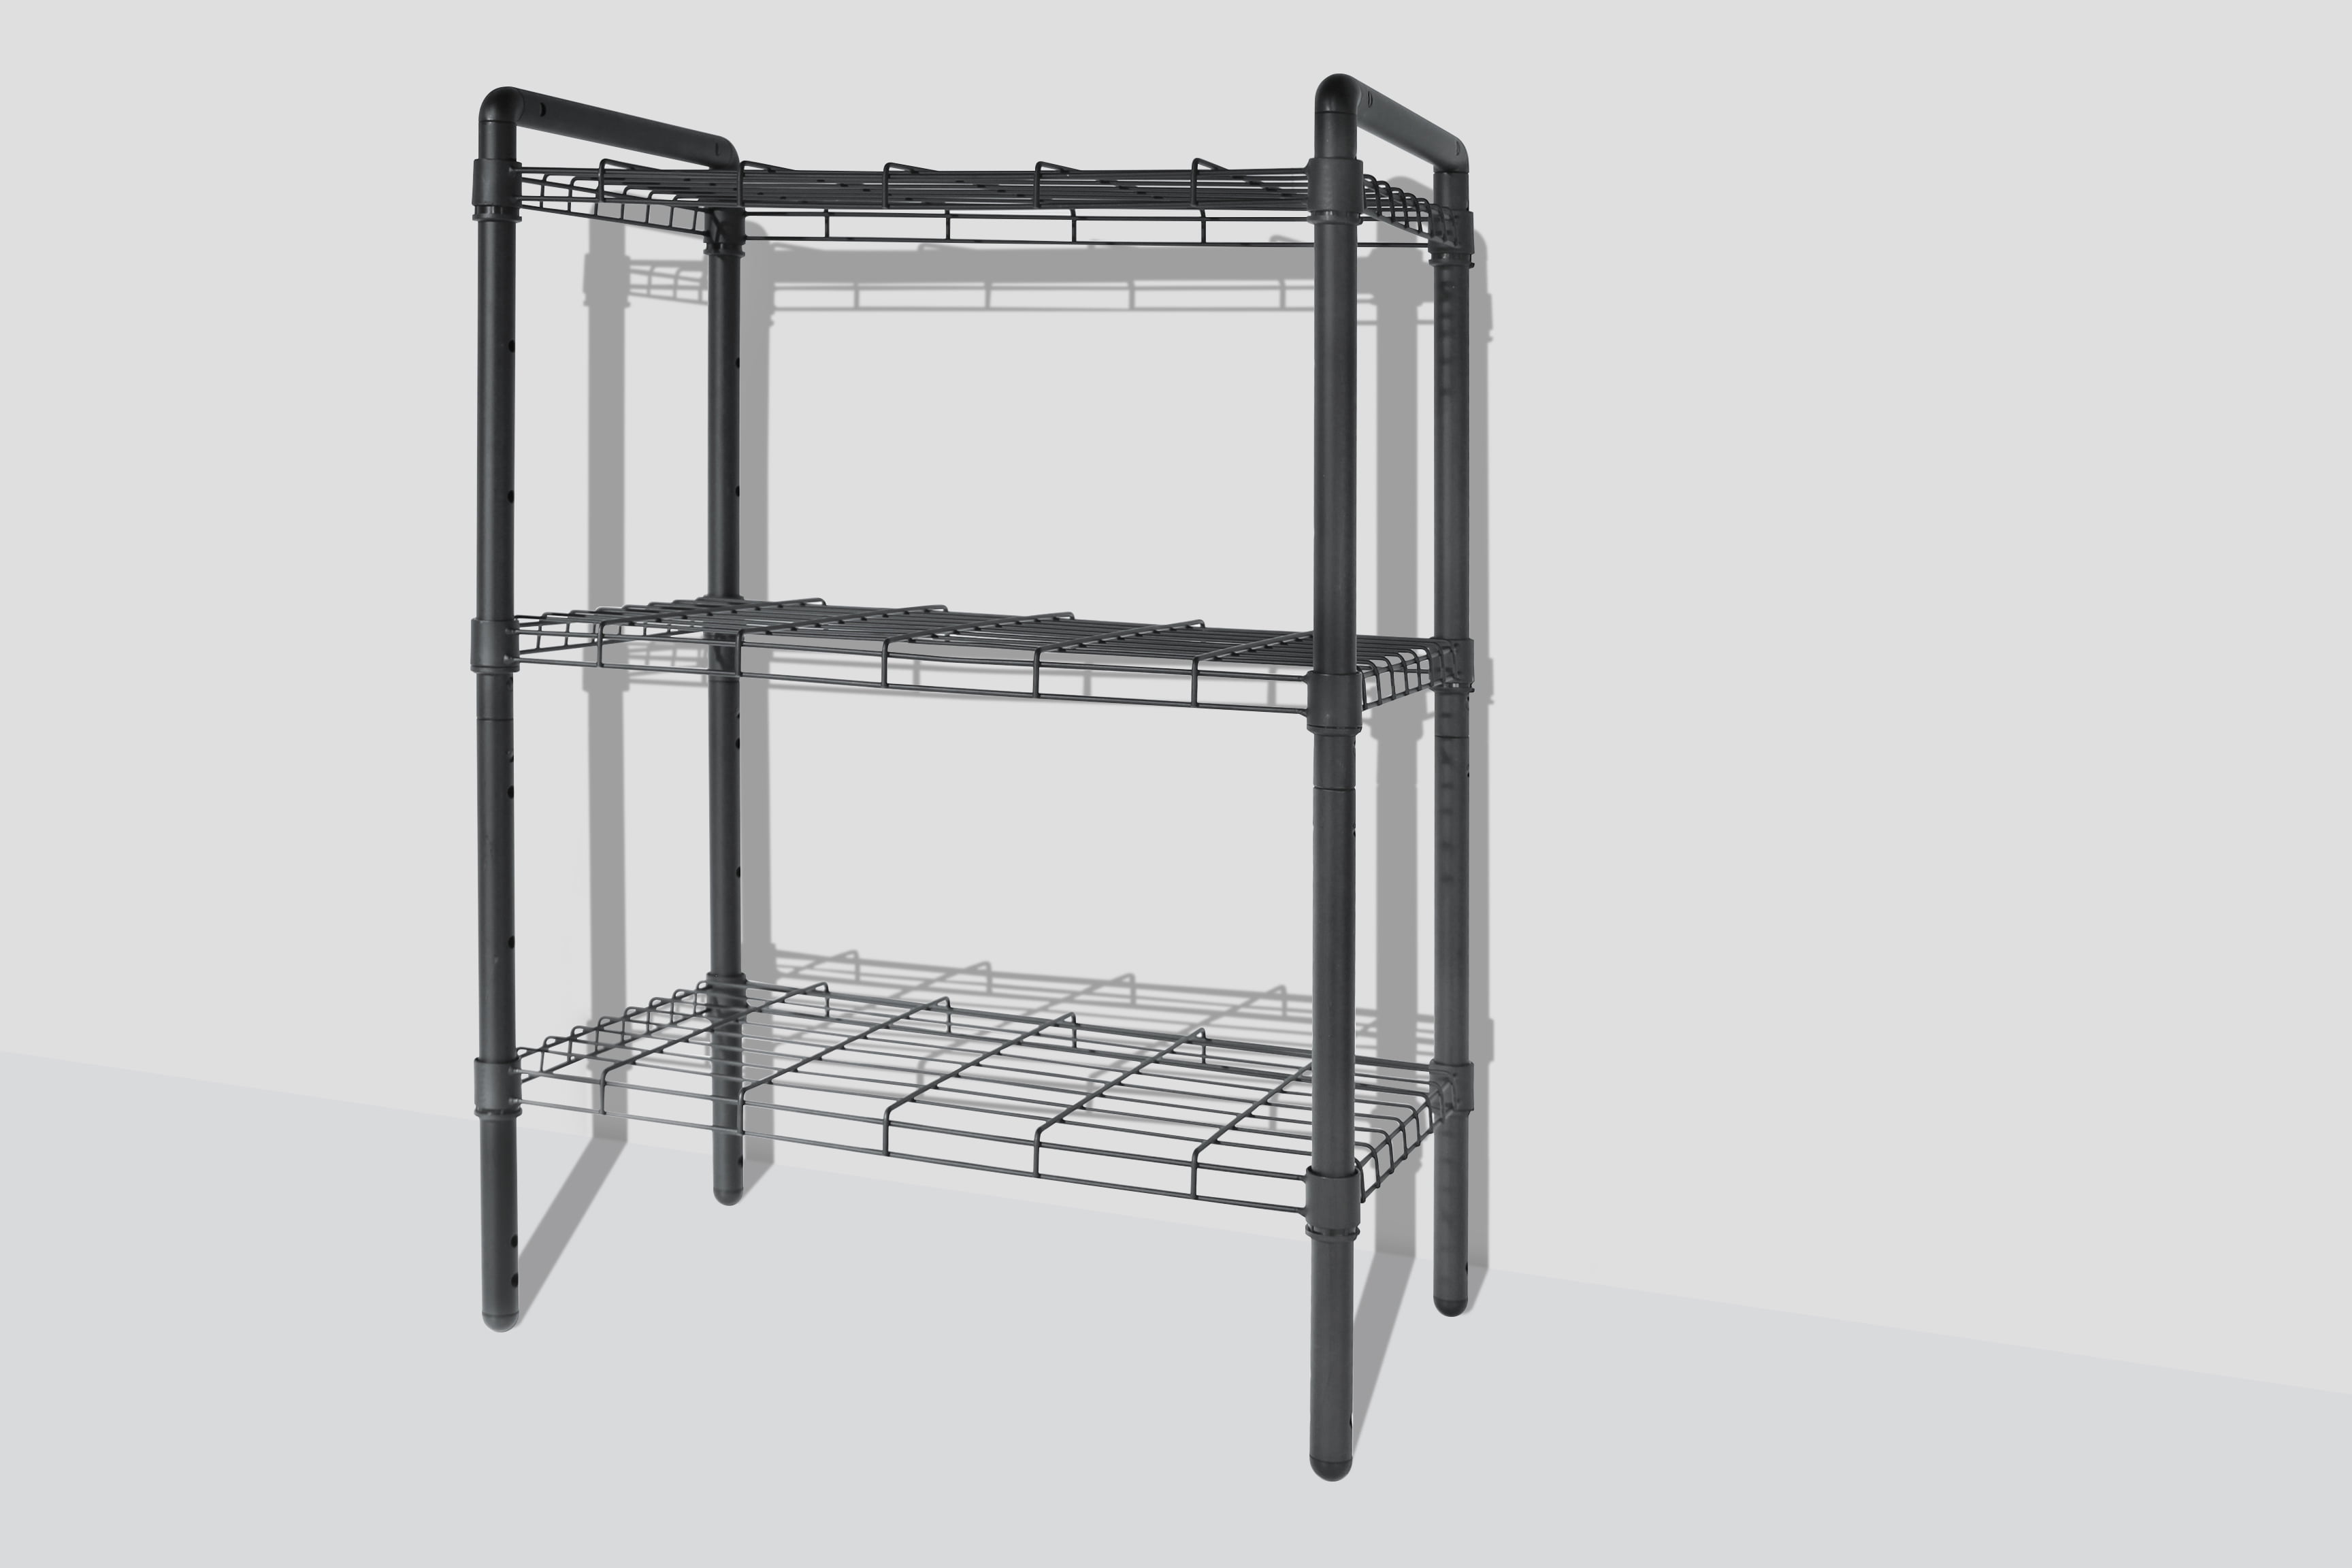 Art Of Storage 3 Tier Wire Shelving, 10 Deep Wire Shelving Unit